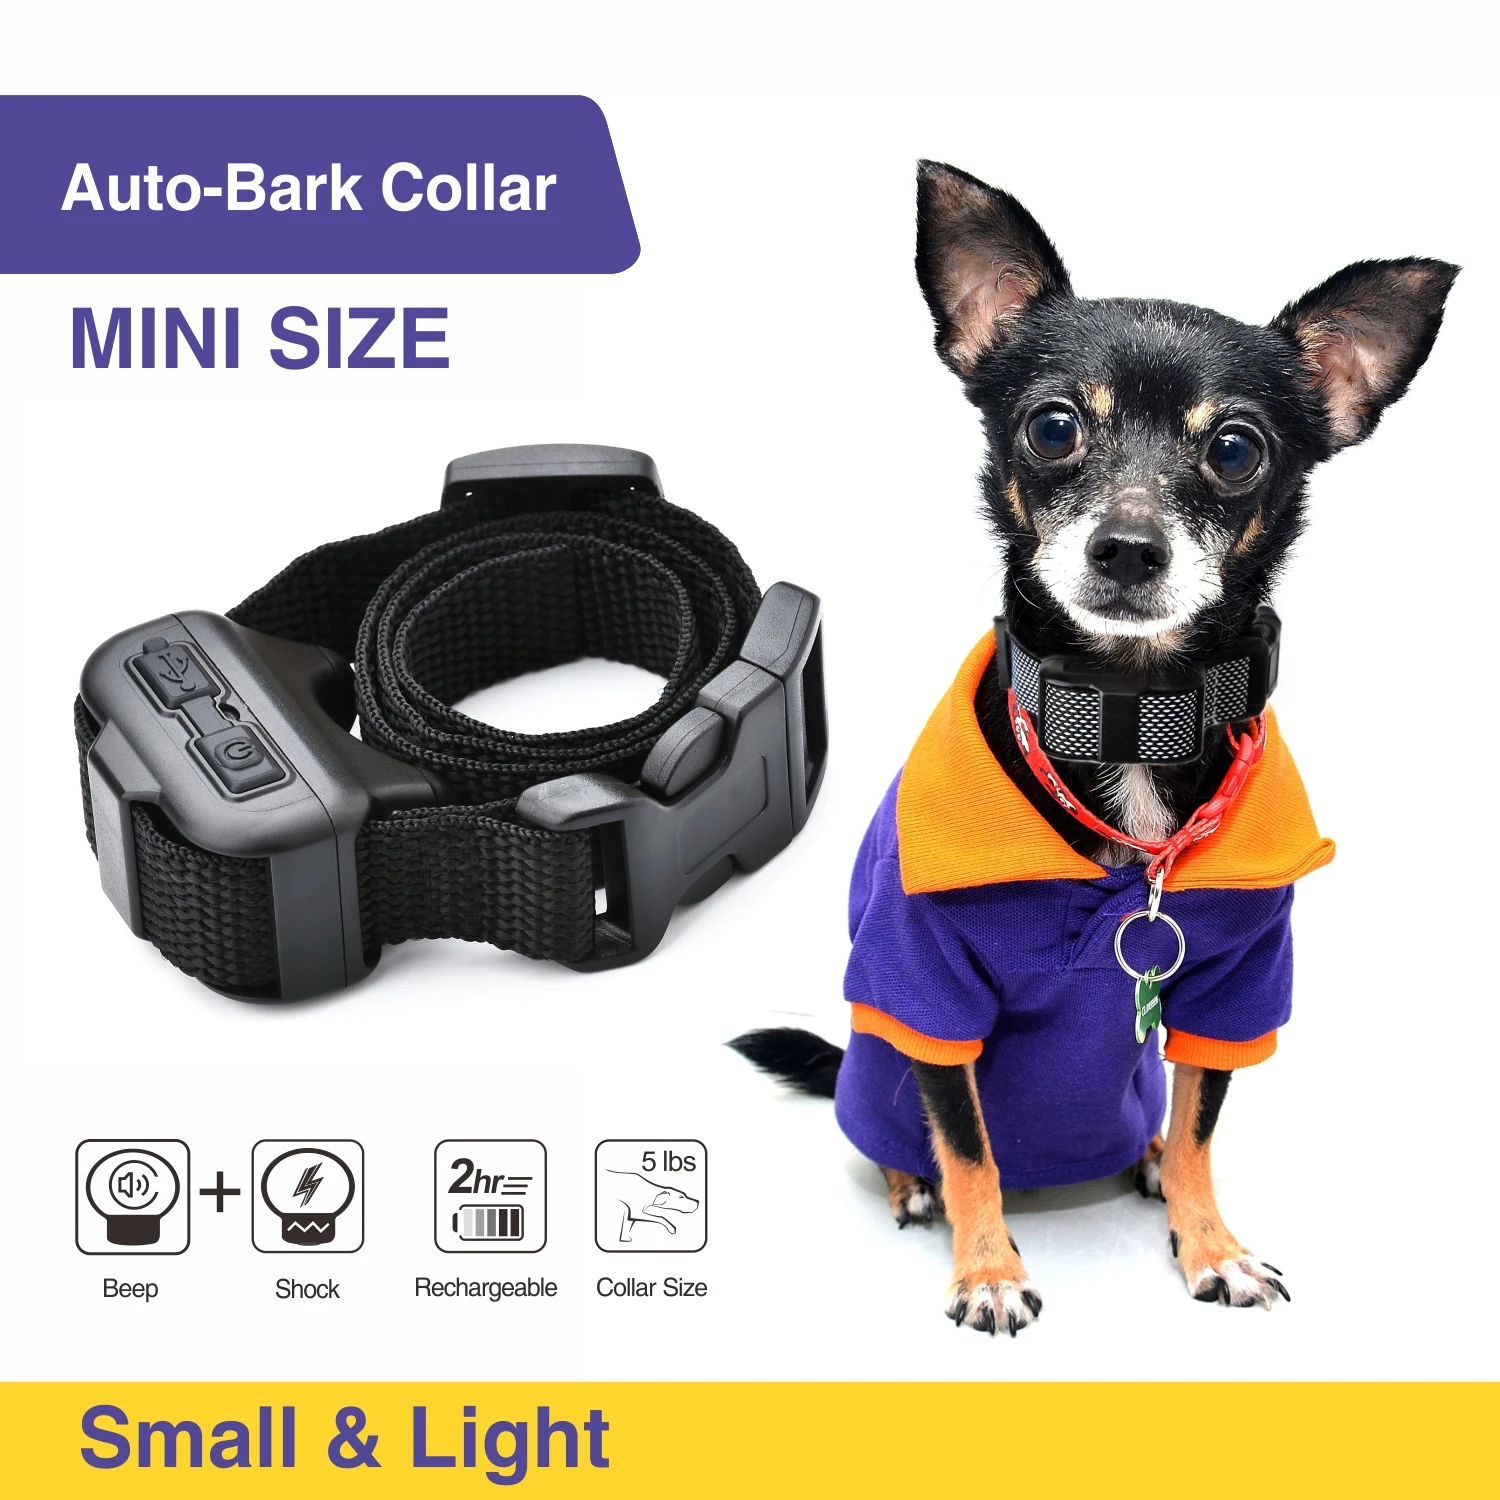 

Small Dog Auto Bark Collar Rechargeable Dog Training Electric Collar Anti No Bark Control For Puppy Dog with Shock Mode